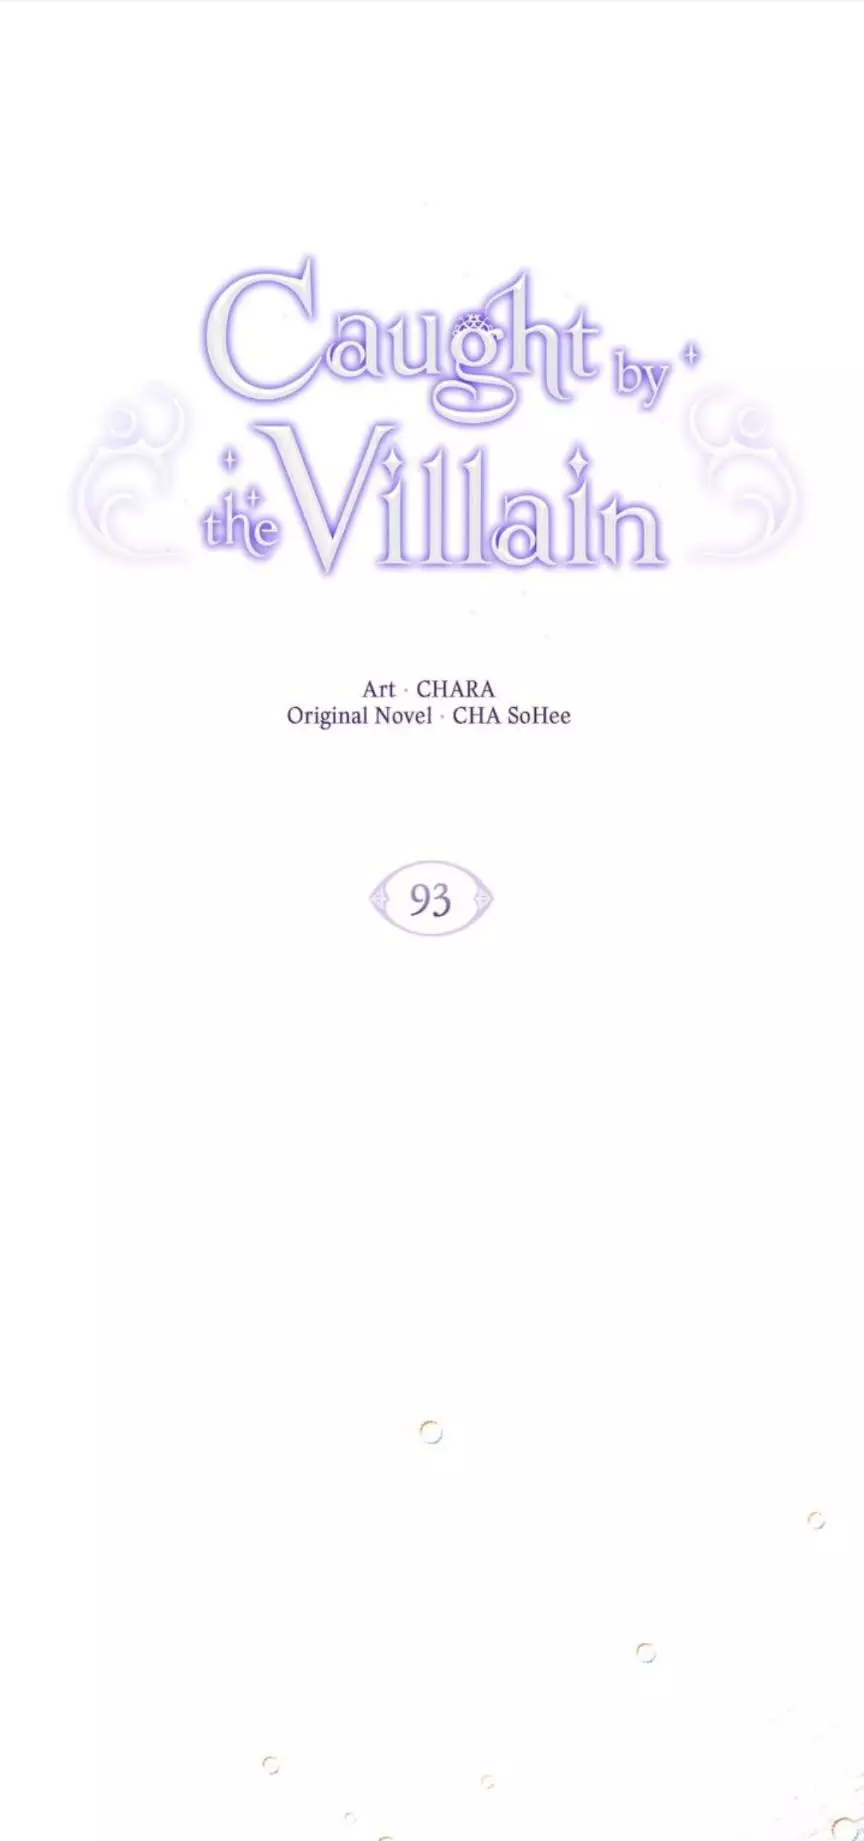 The Villain Discovered My Identity - 93 page 1-c8a2910f